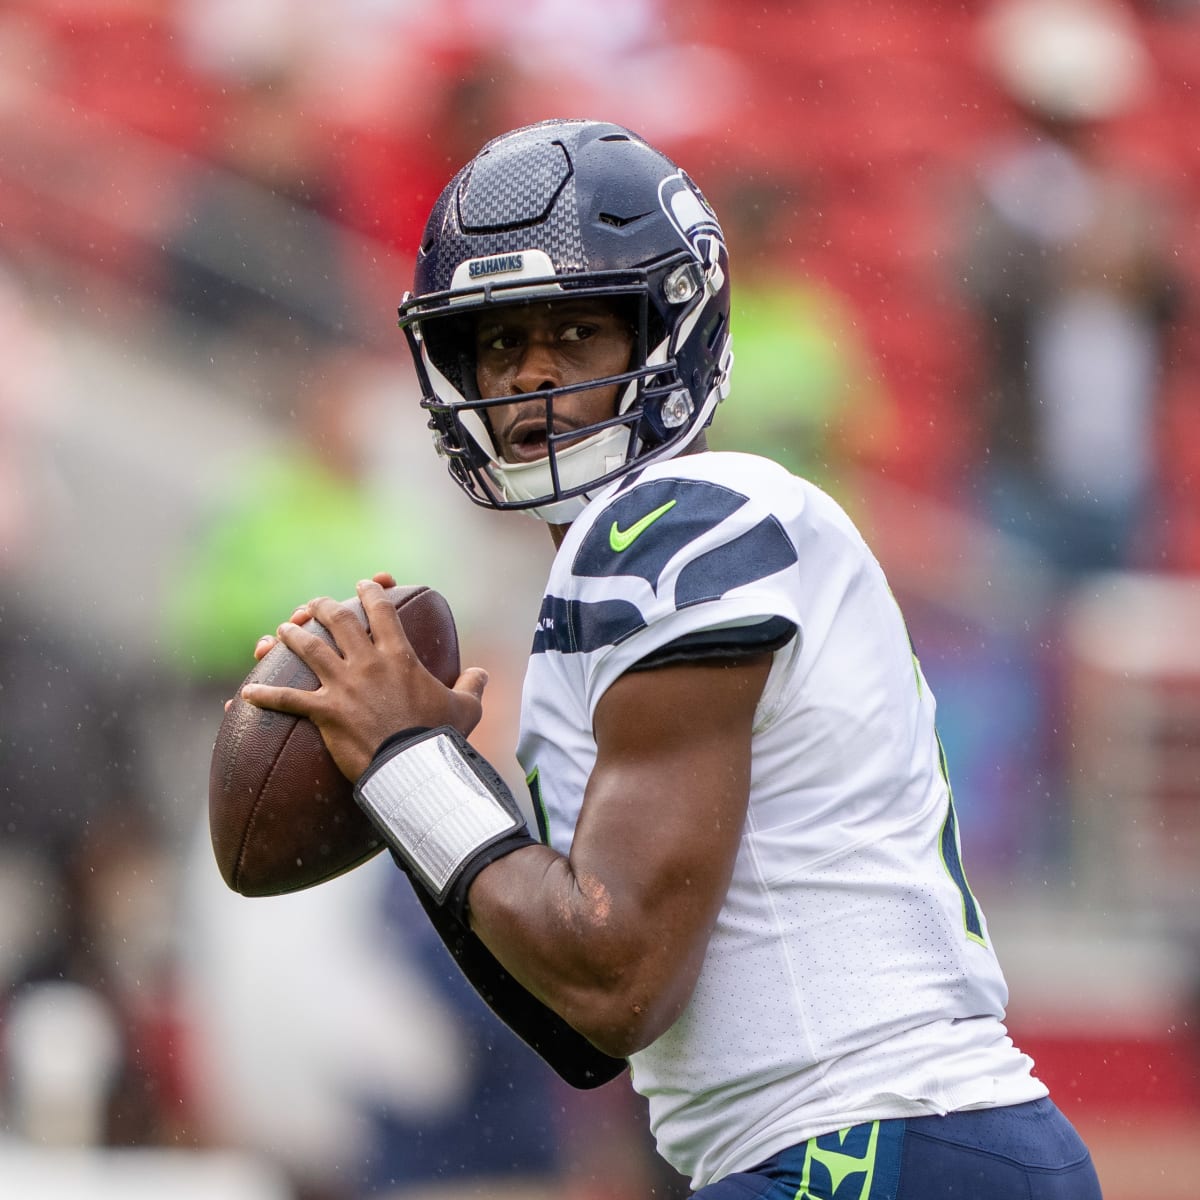 A Letter to the 12s by Geno Smith : r/Seahawks